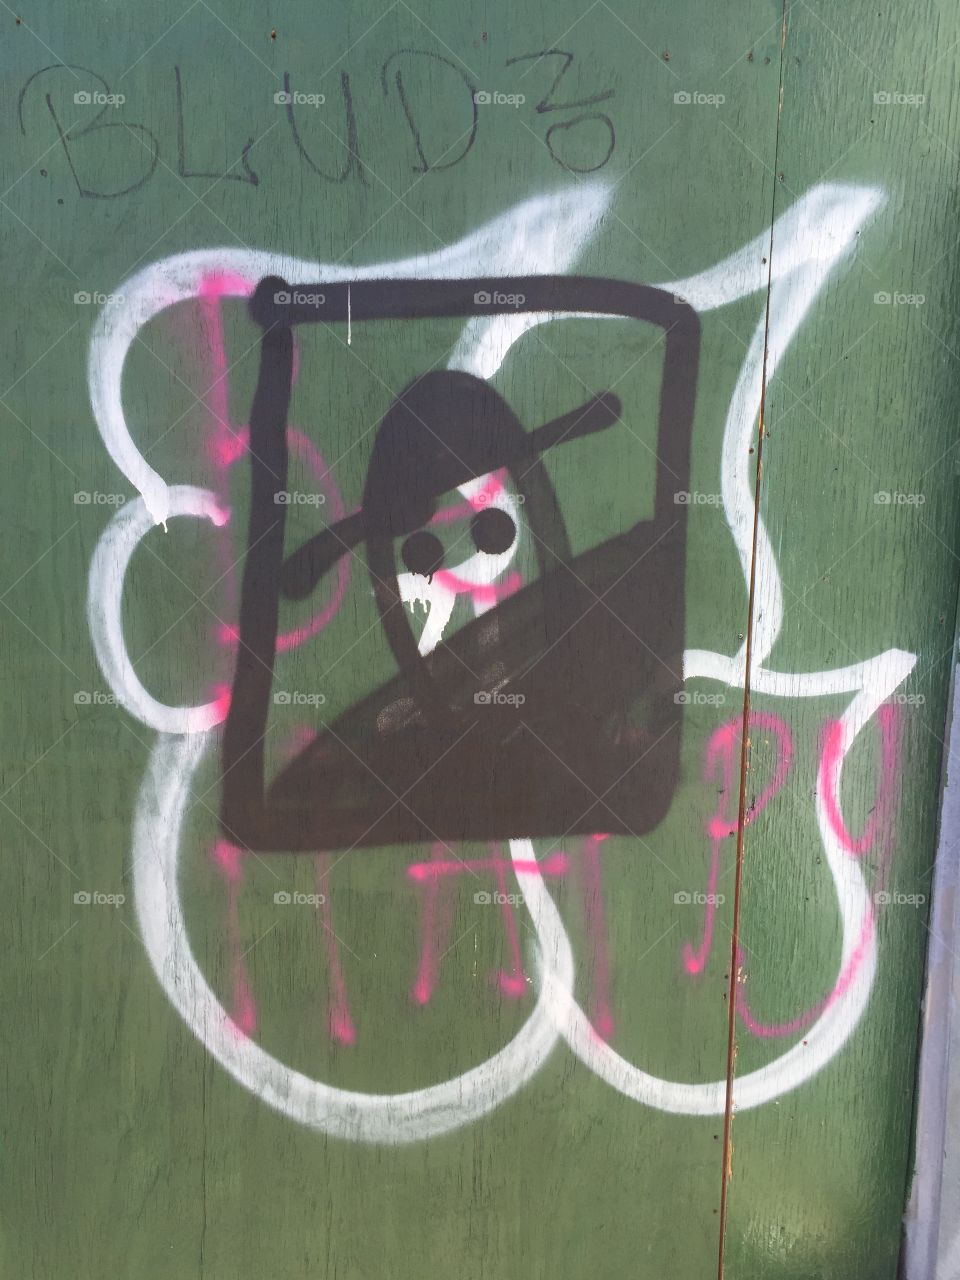 Graffiti sprayed on a construction citing of a depicted bandit or pirate . Bloods is also sprayed up top so it may indicate gang activity . Urban technique was used to make it look like a quick draft .  Great quick style. 